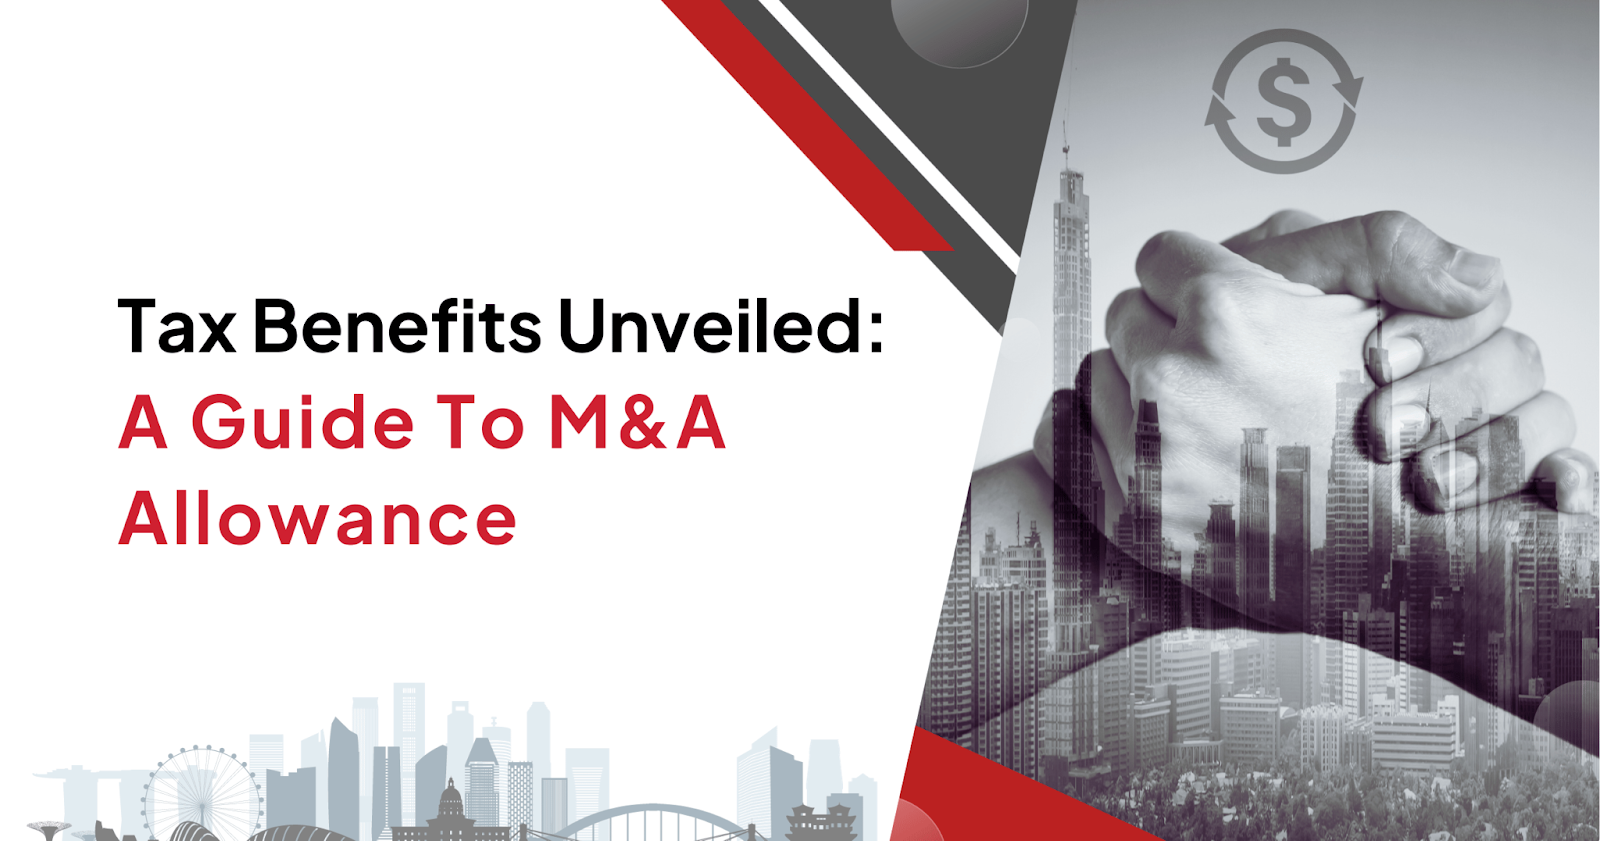 Tax Benefits Unveiled: A Guide to M&A Allowance